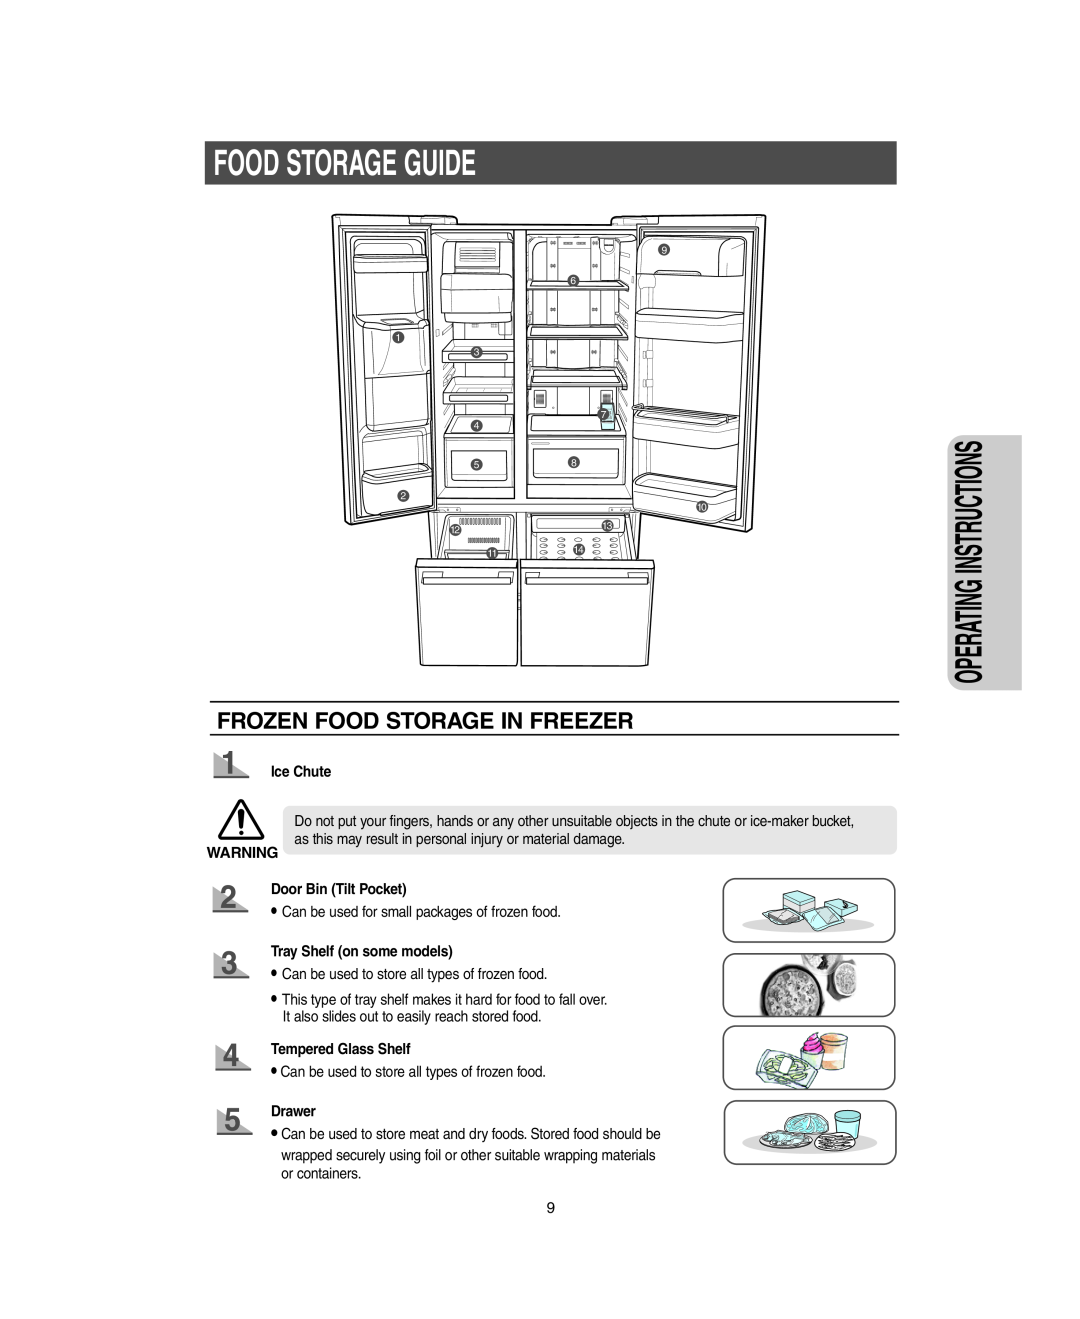 Samsung RM255LARS Food Storage Guide, Frozen Food Storage In Freezer, Operating Instructions, Ice Chute, Drawer 